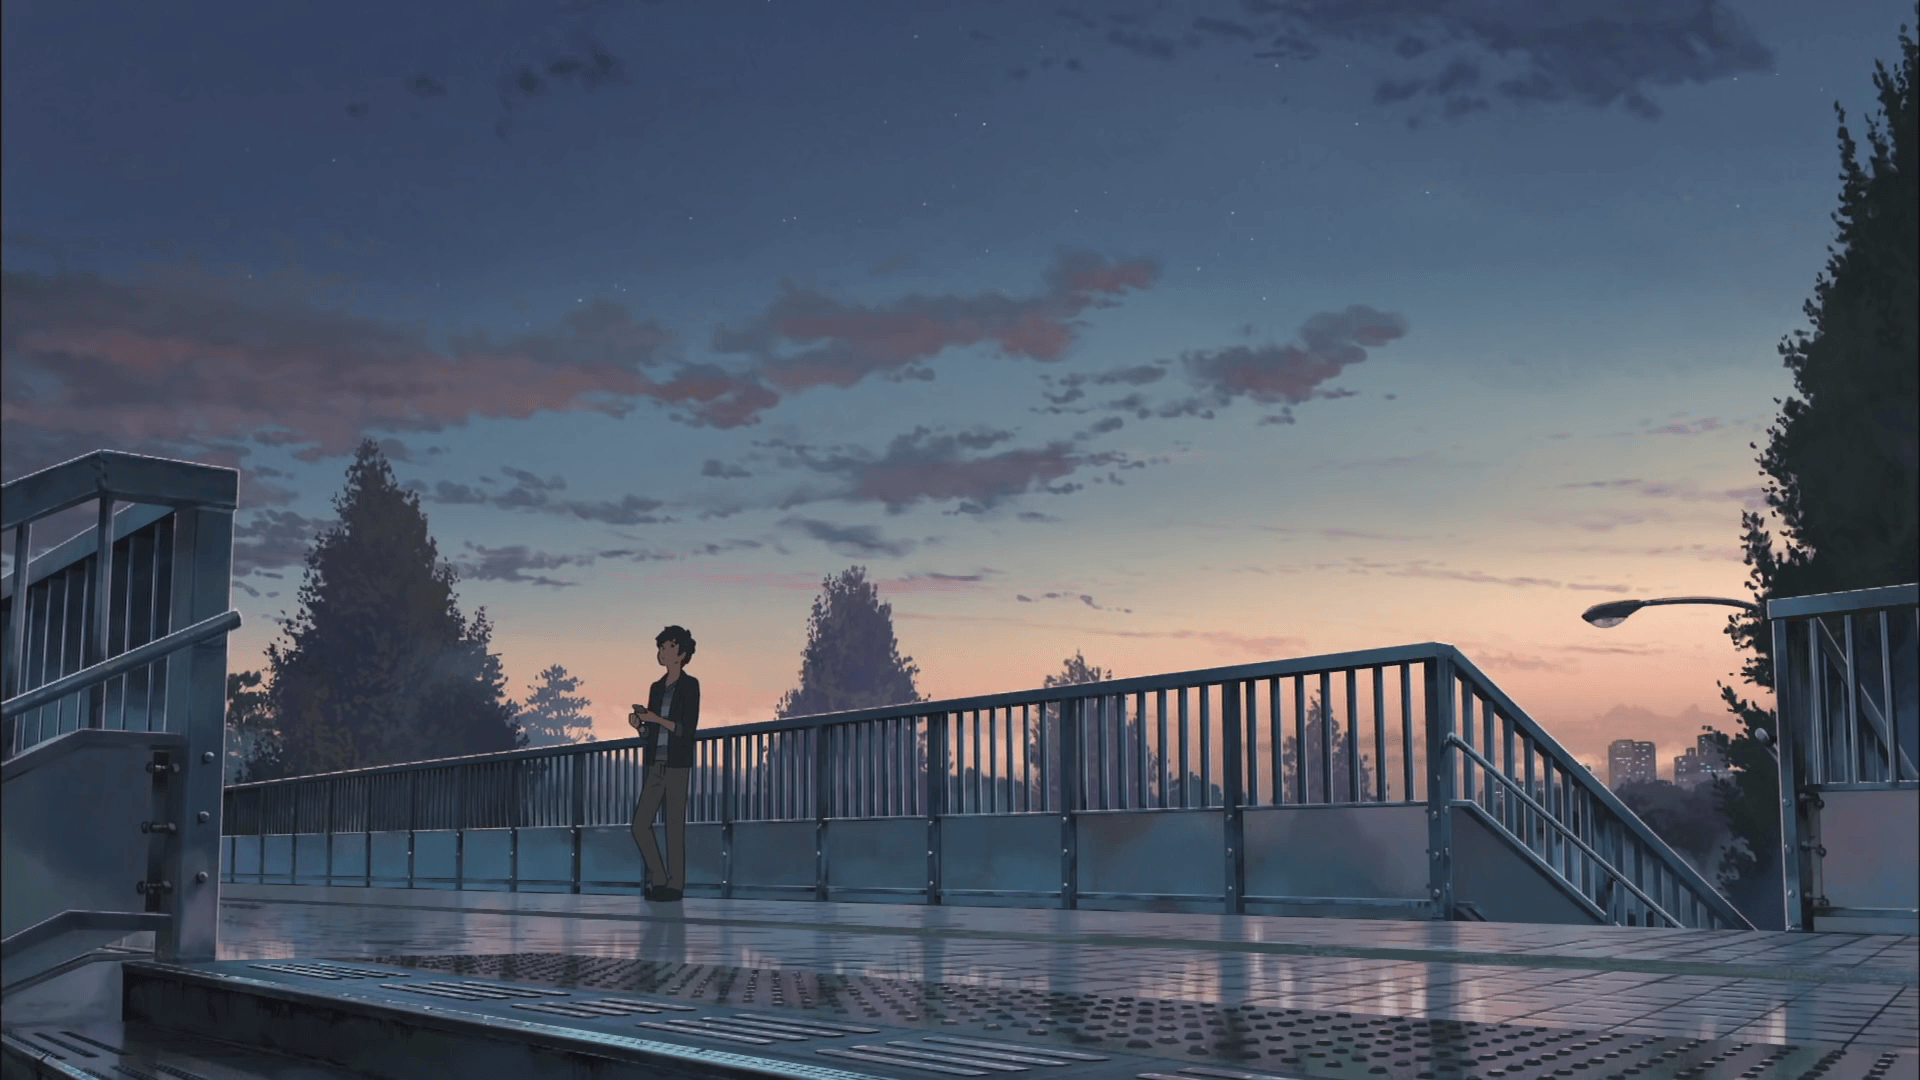 836 Your Name. HD Wallpapers